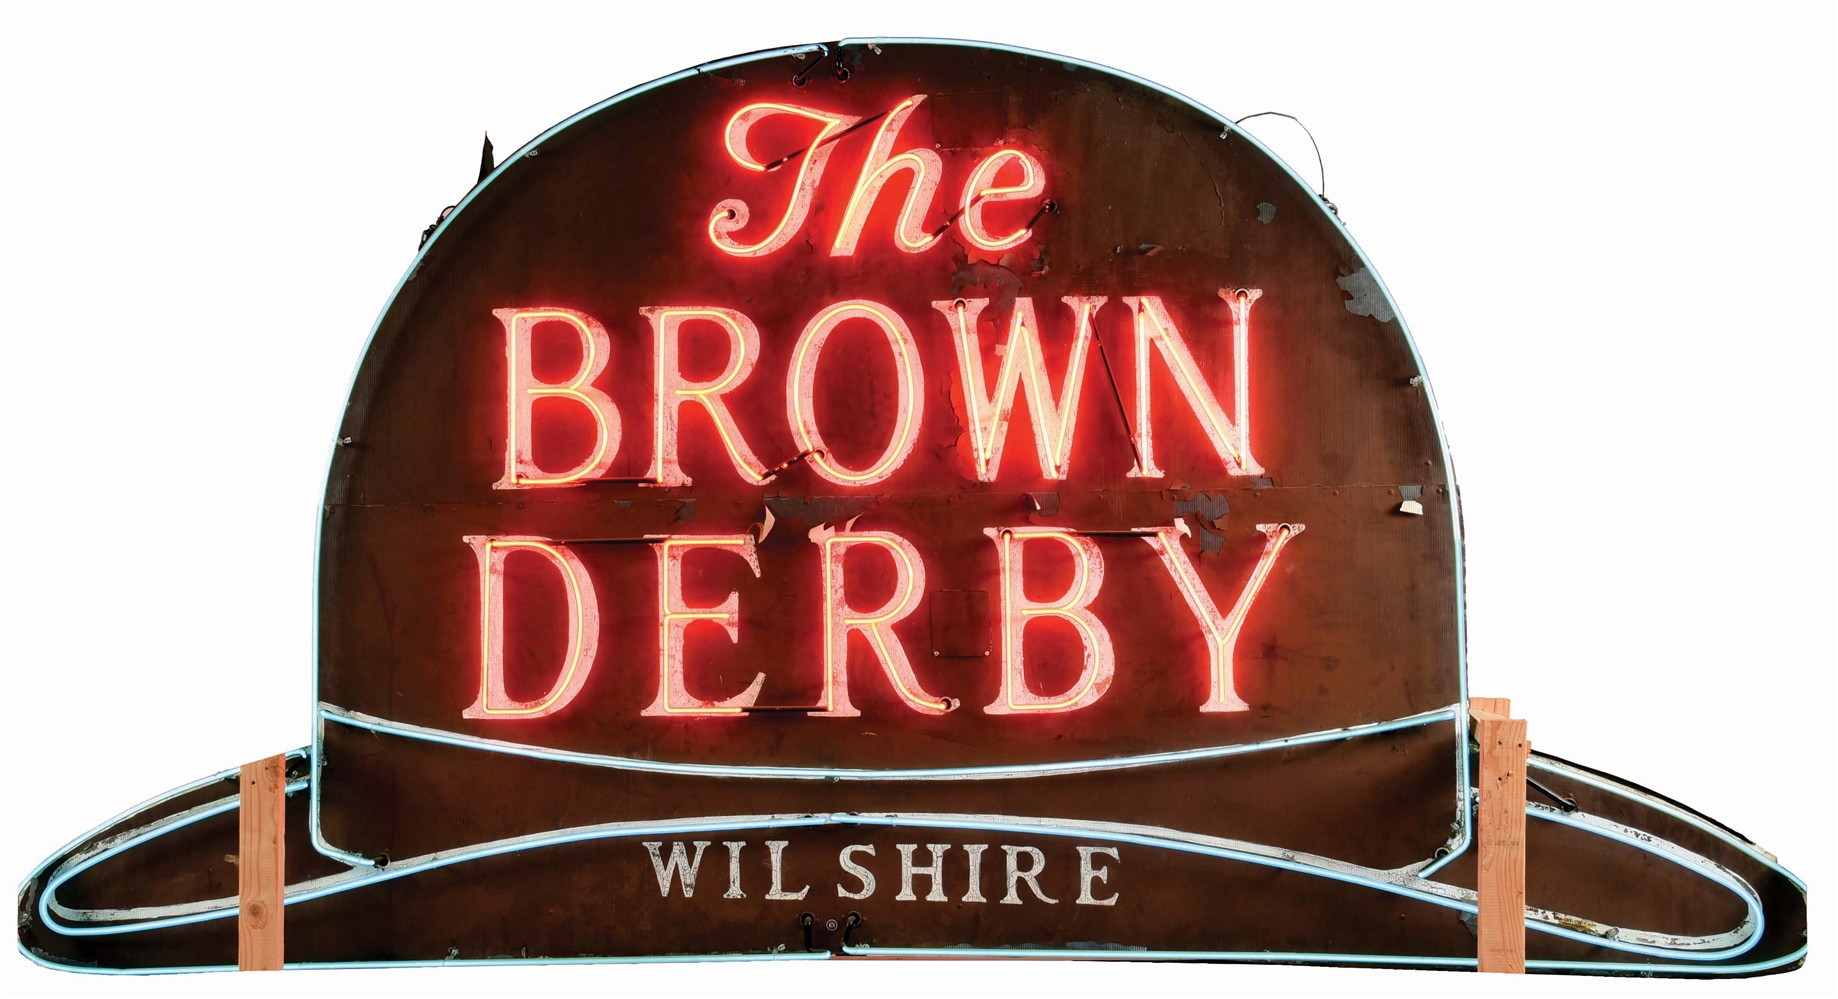 PAINTED RIPPLED STEEL "THE BROWN DERBY WILSHIRE" DOUBLE-SIDED NEON SIGN.